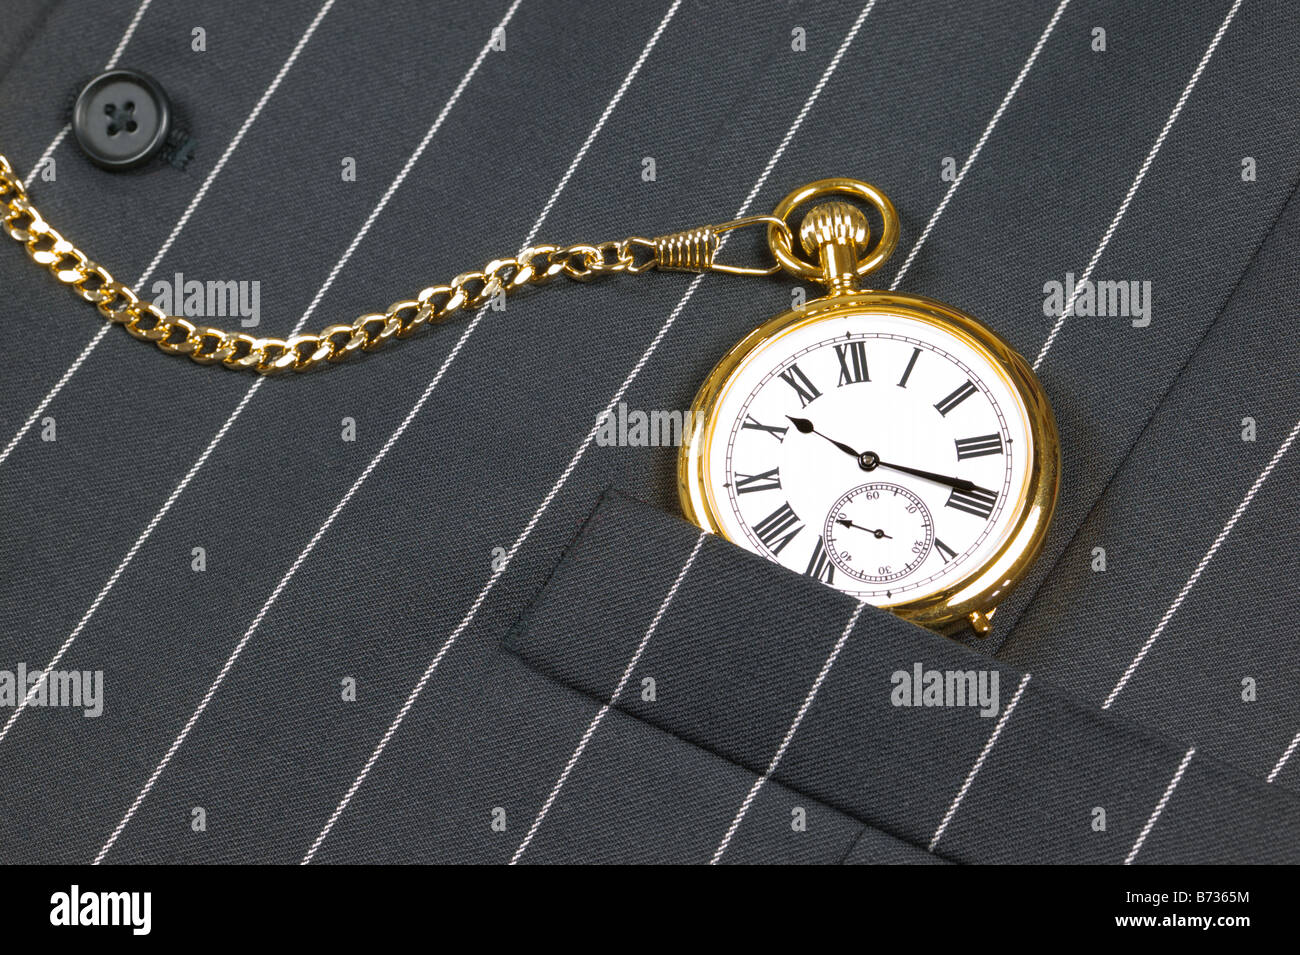 Gold pocket watch with roman numerals in the pocket of a waistcoat Stock Photo